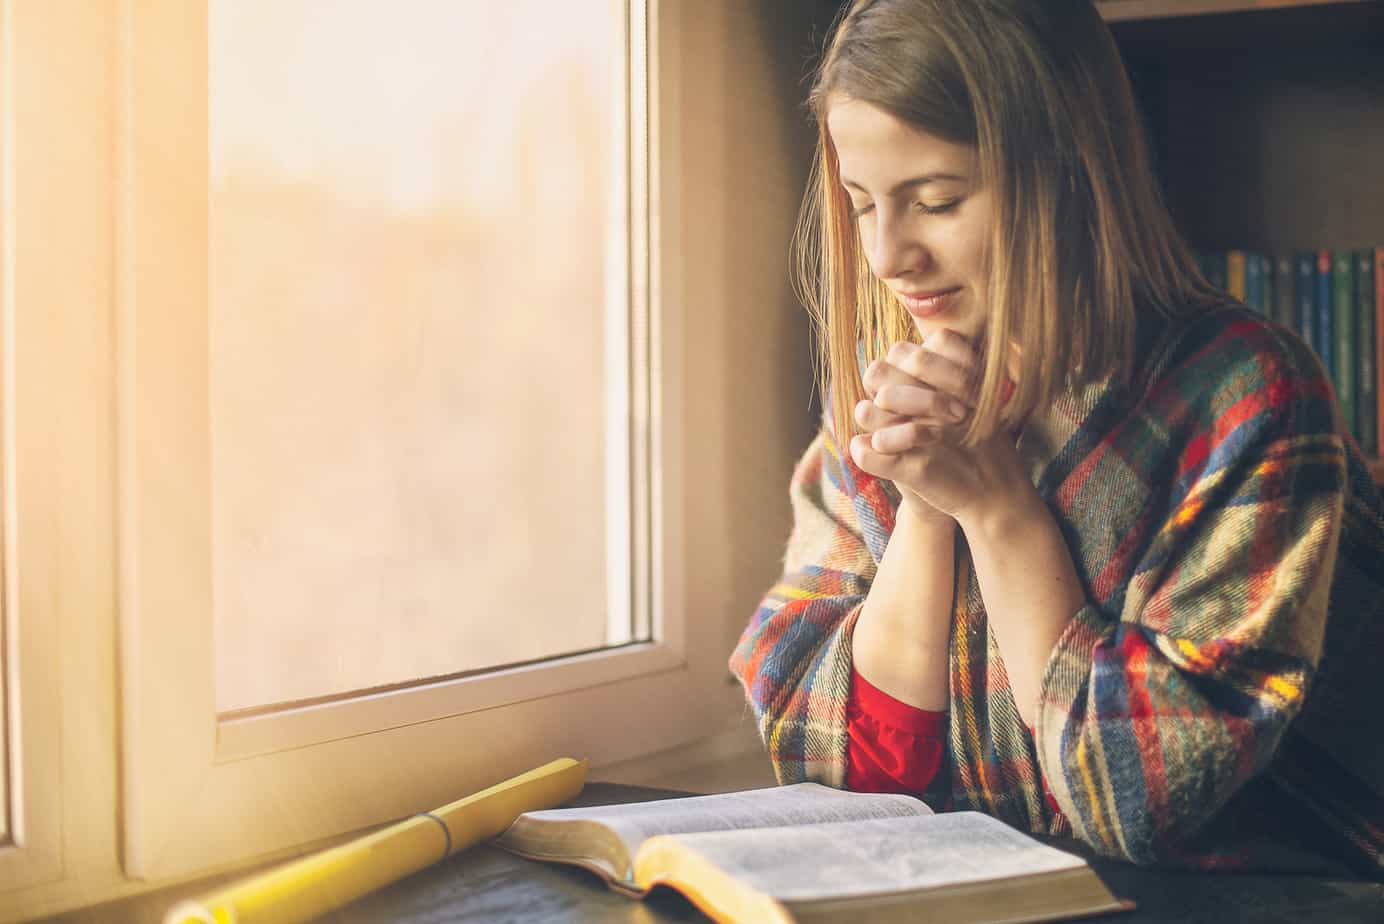 A woman has her hands grasped while reading a bible near the window.